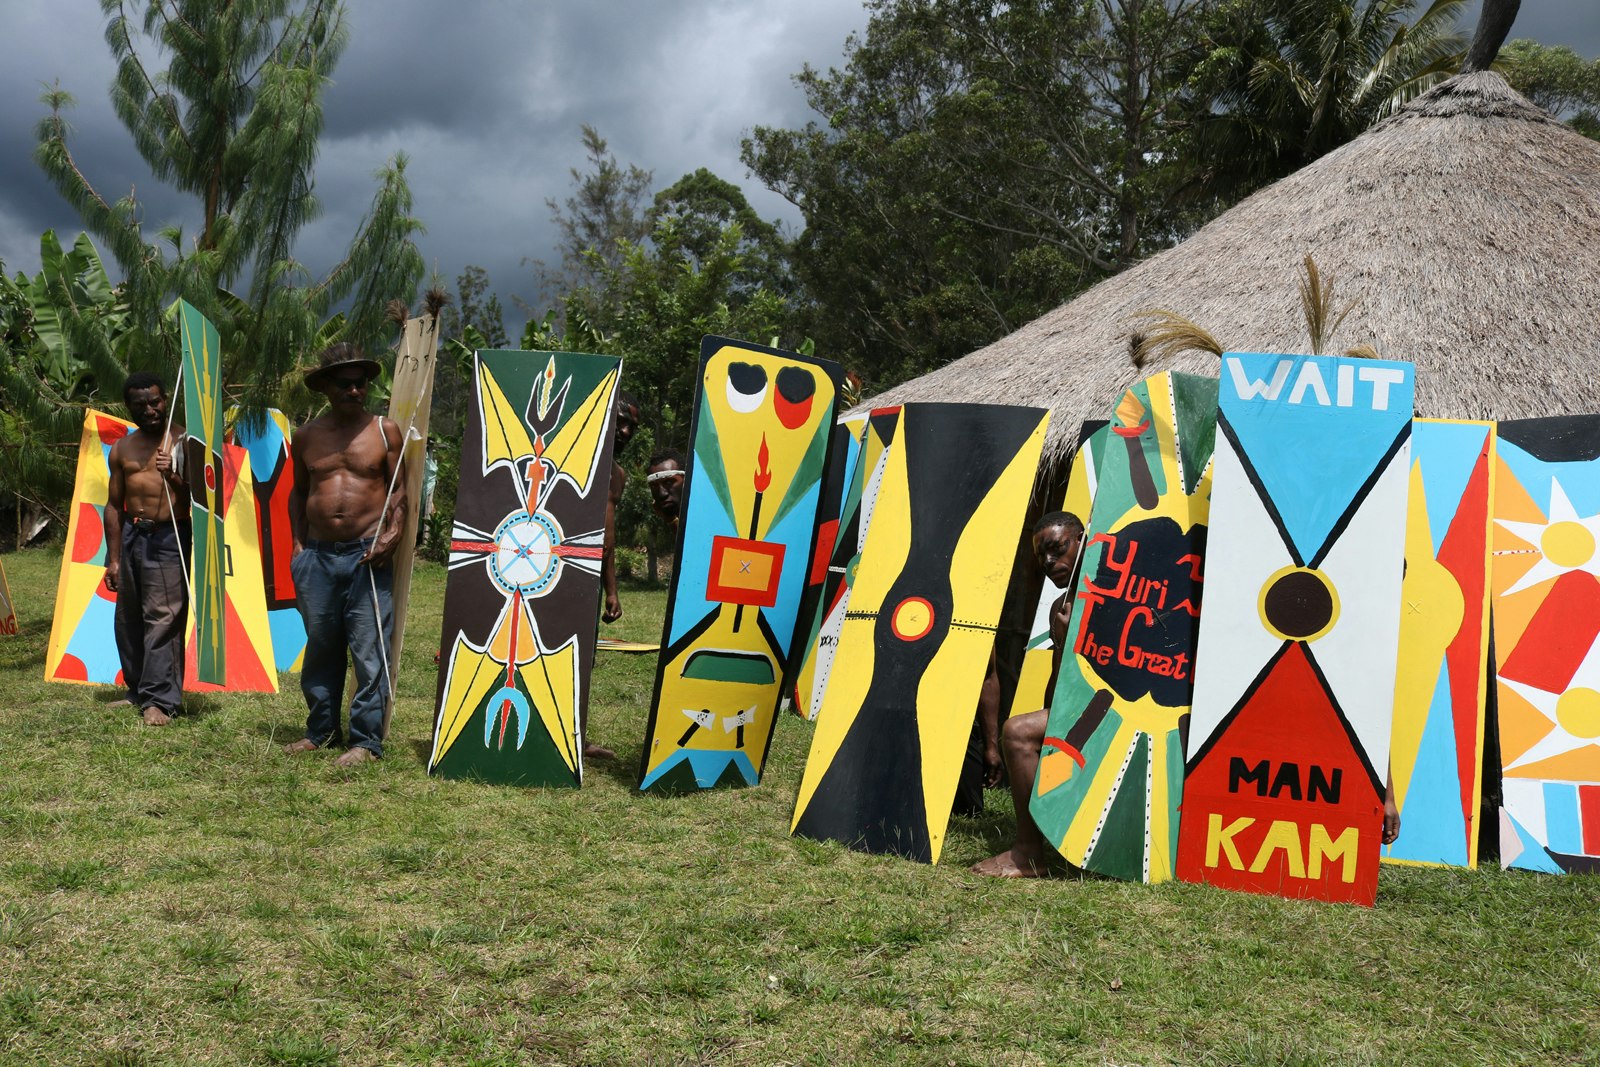 A series of kuman, painted with bright yellow triangles and blue and red shapes, outside a grass hut. One of them is painted with the words, Wait Man Kam.